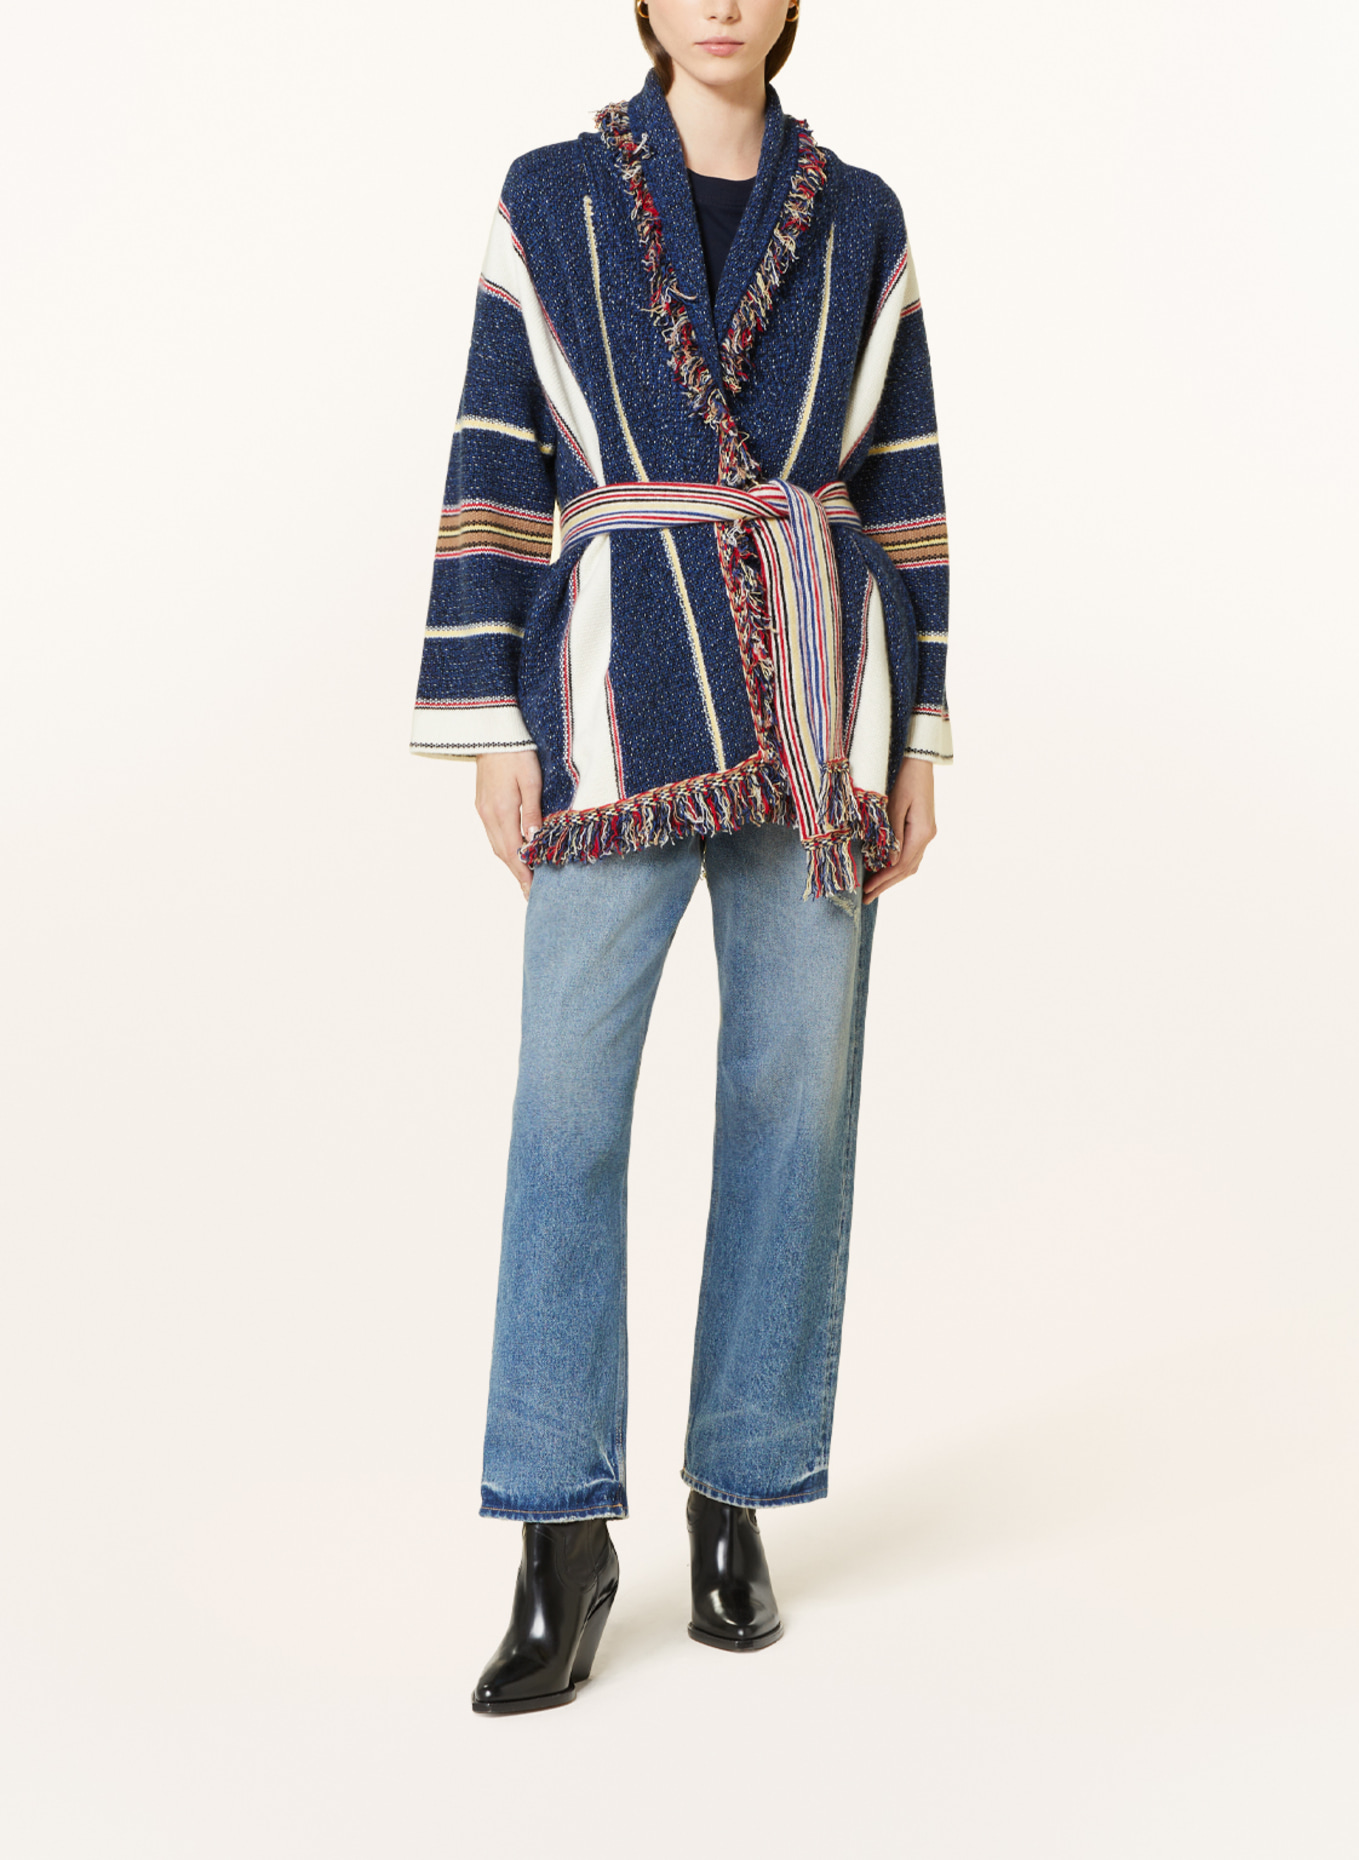 KUJTEN Knit cardigan MARIELLA in cashmere, Color: BLUE/ WHITE/ RED (Image 2)